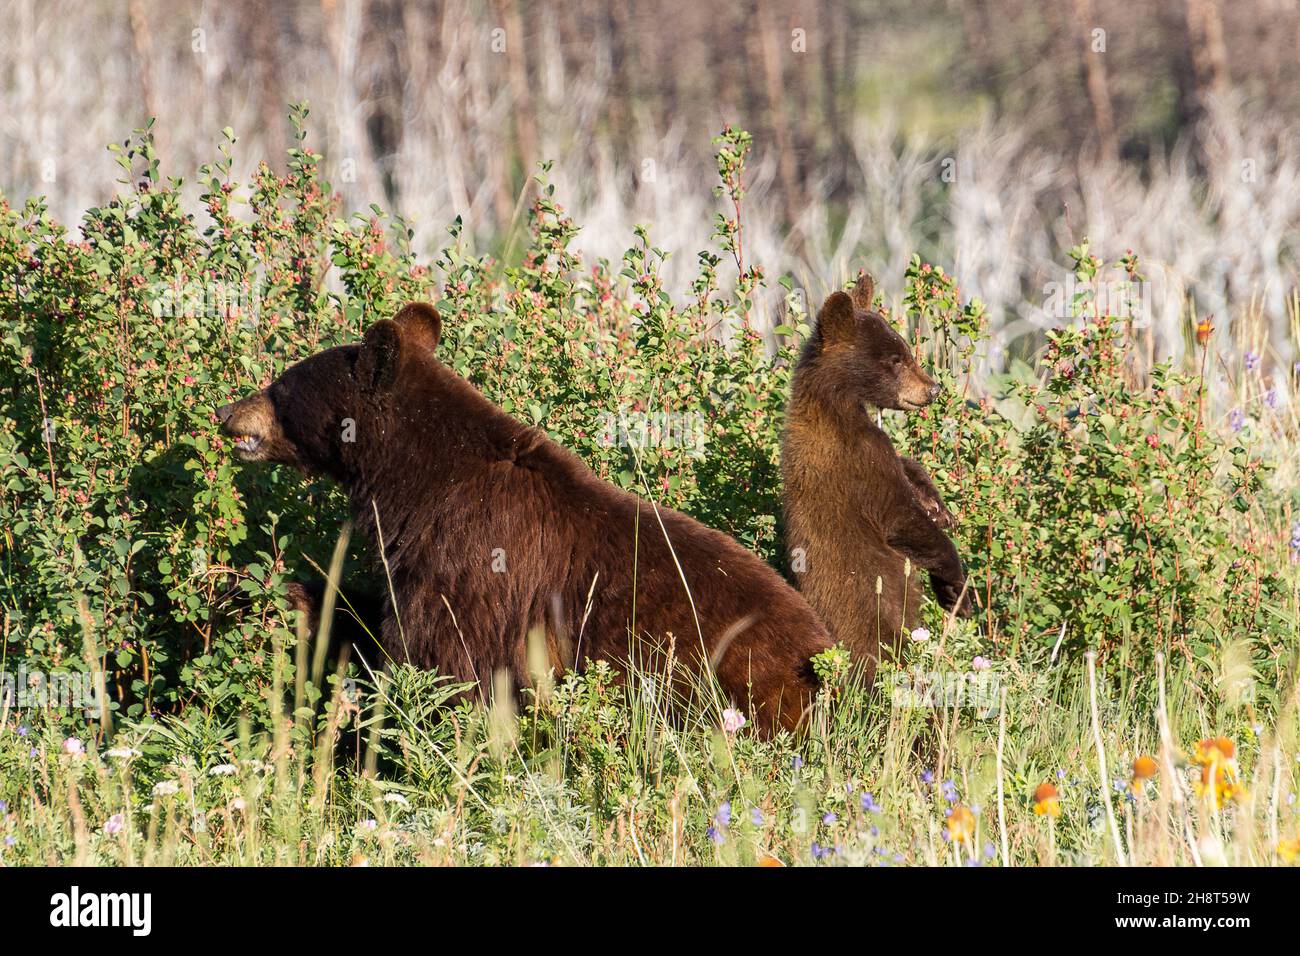 mom black bear with cub eating berries in grass, baby standing up on back feet alert, looking around at surroundings Stock Photo